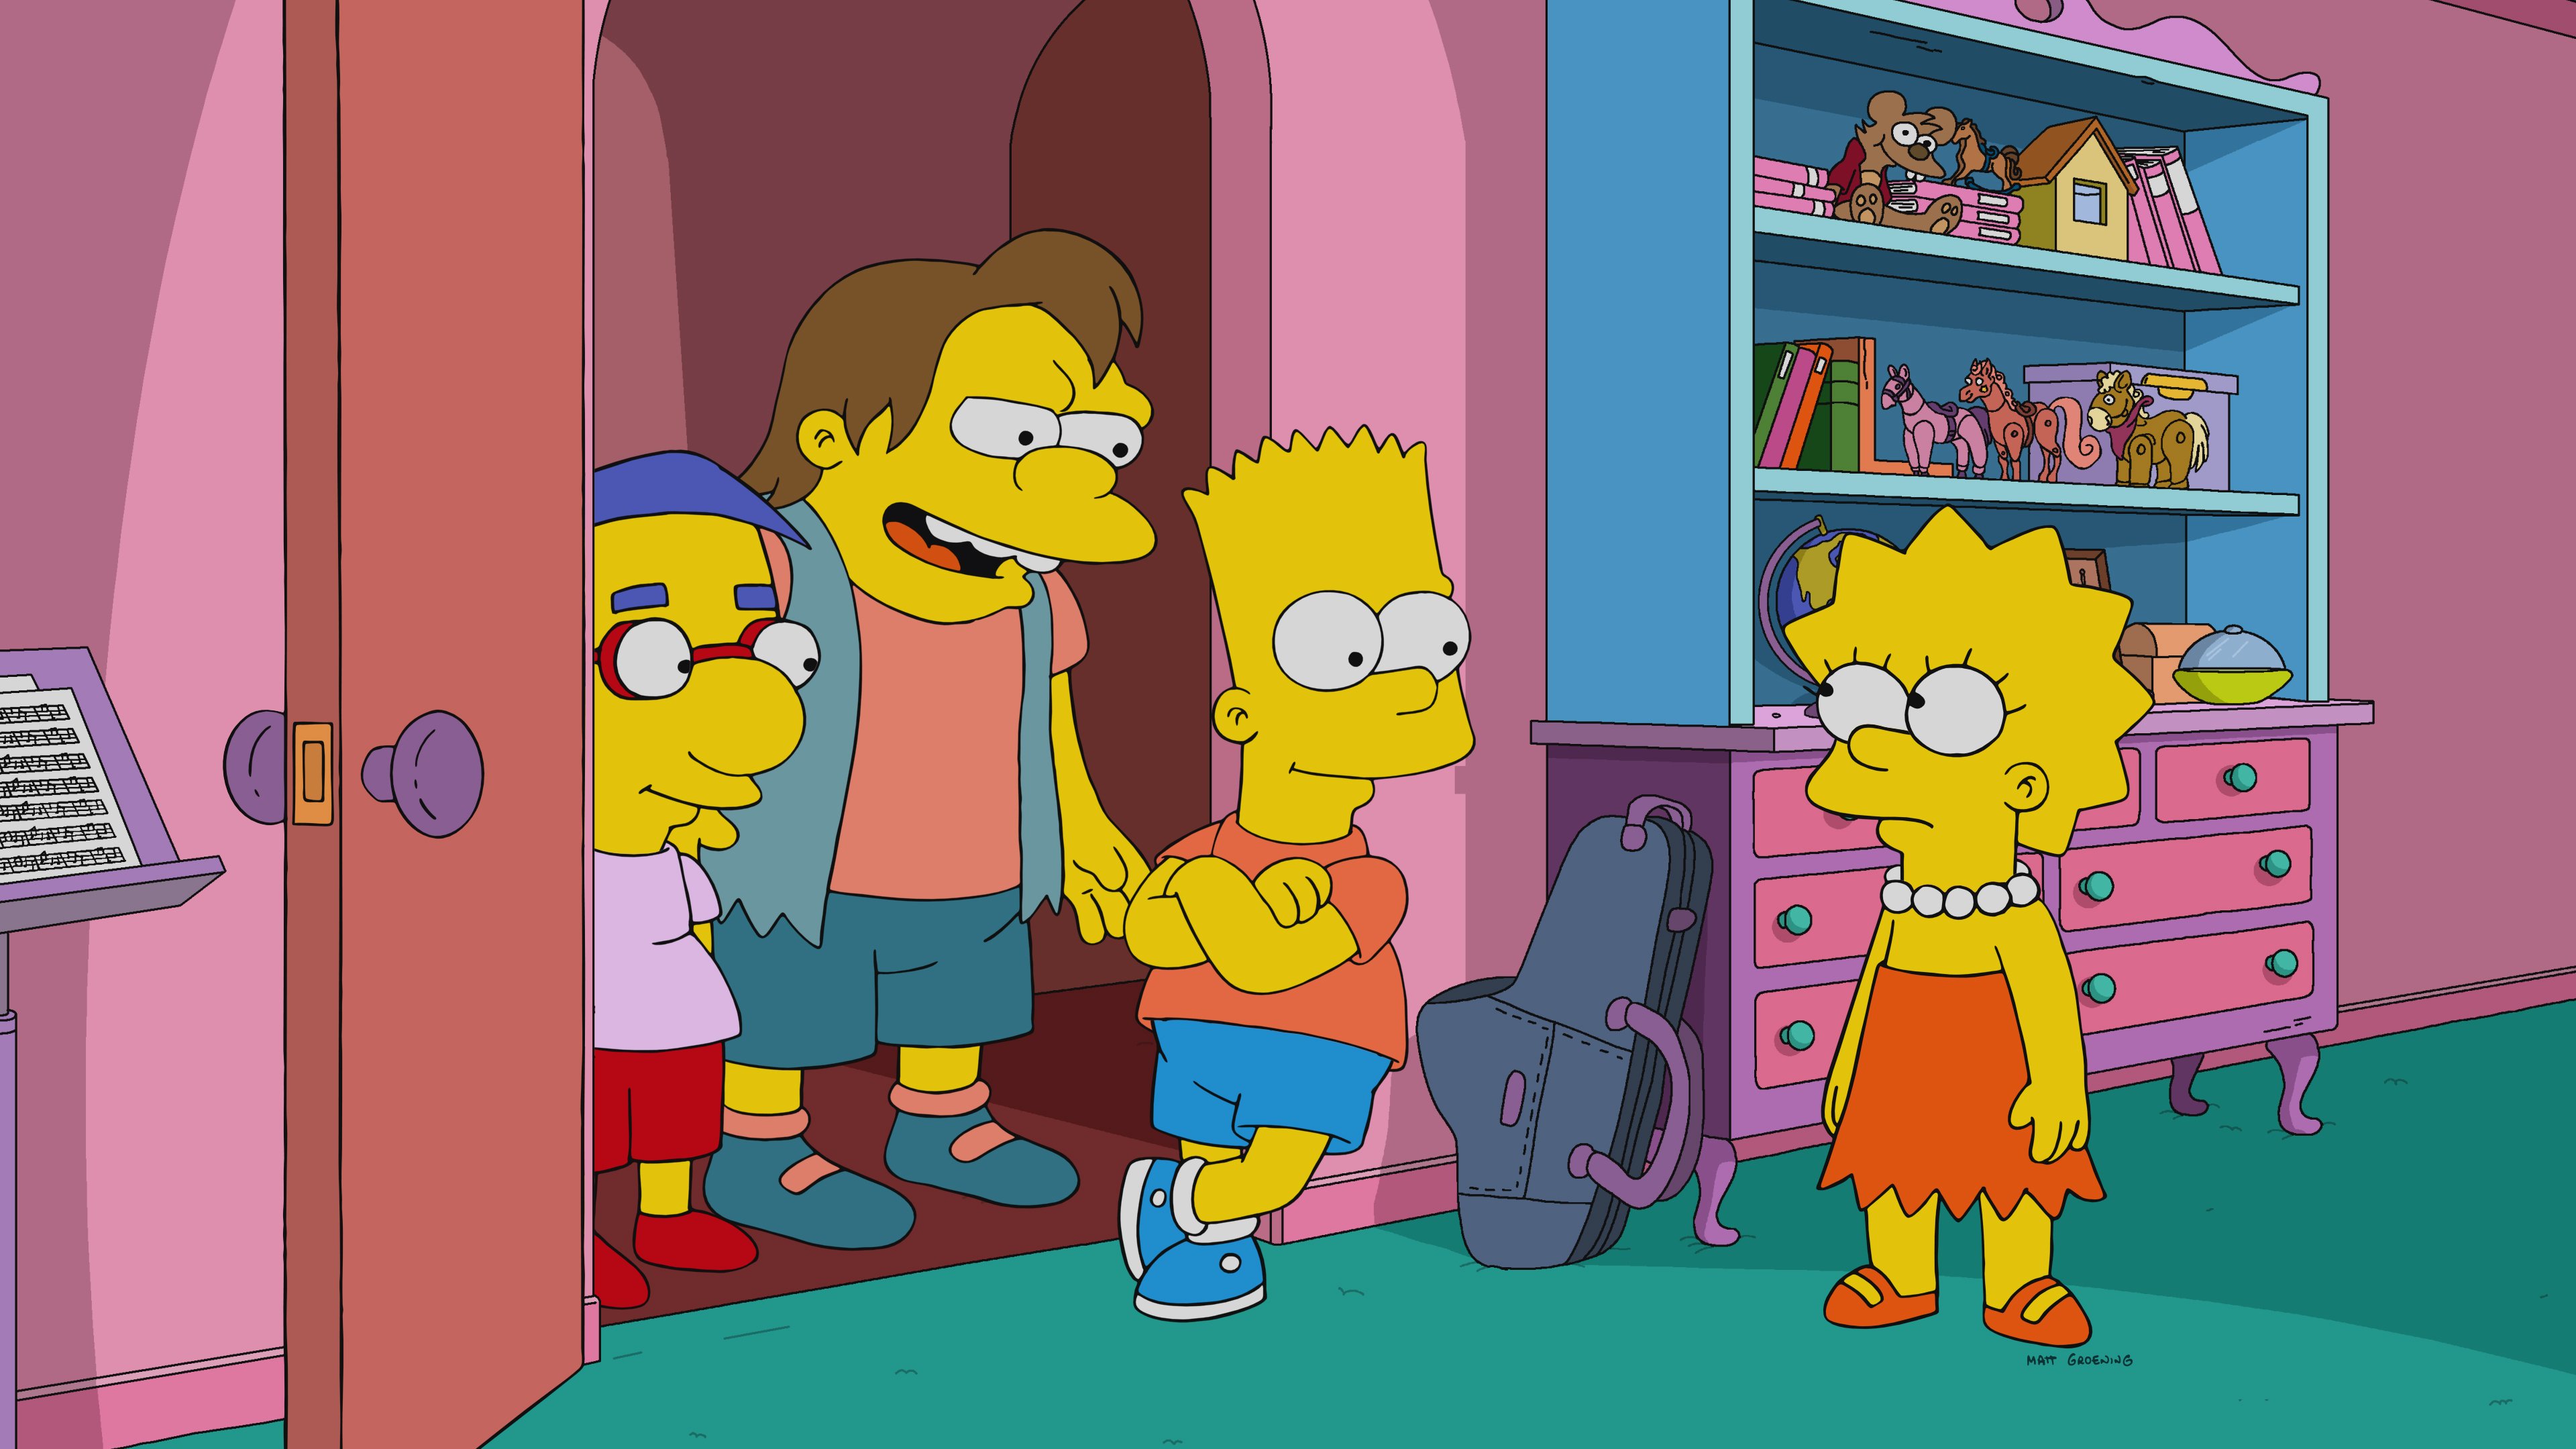 The Simpsons friends Milhouse and Nelson come over to Bart and Lisa's house